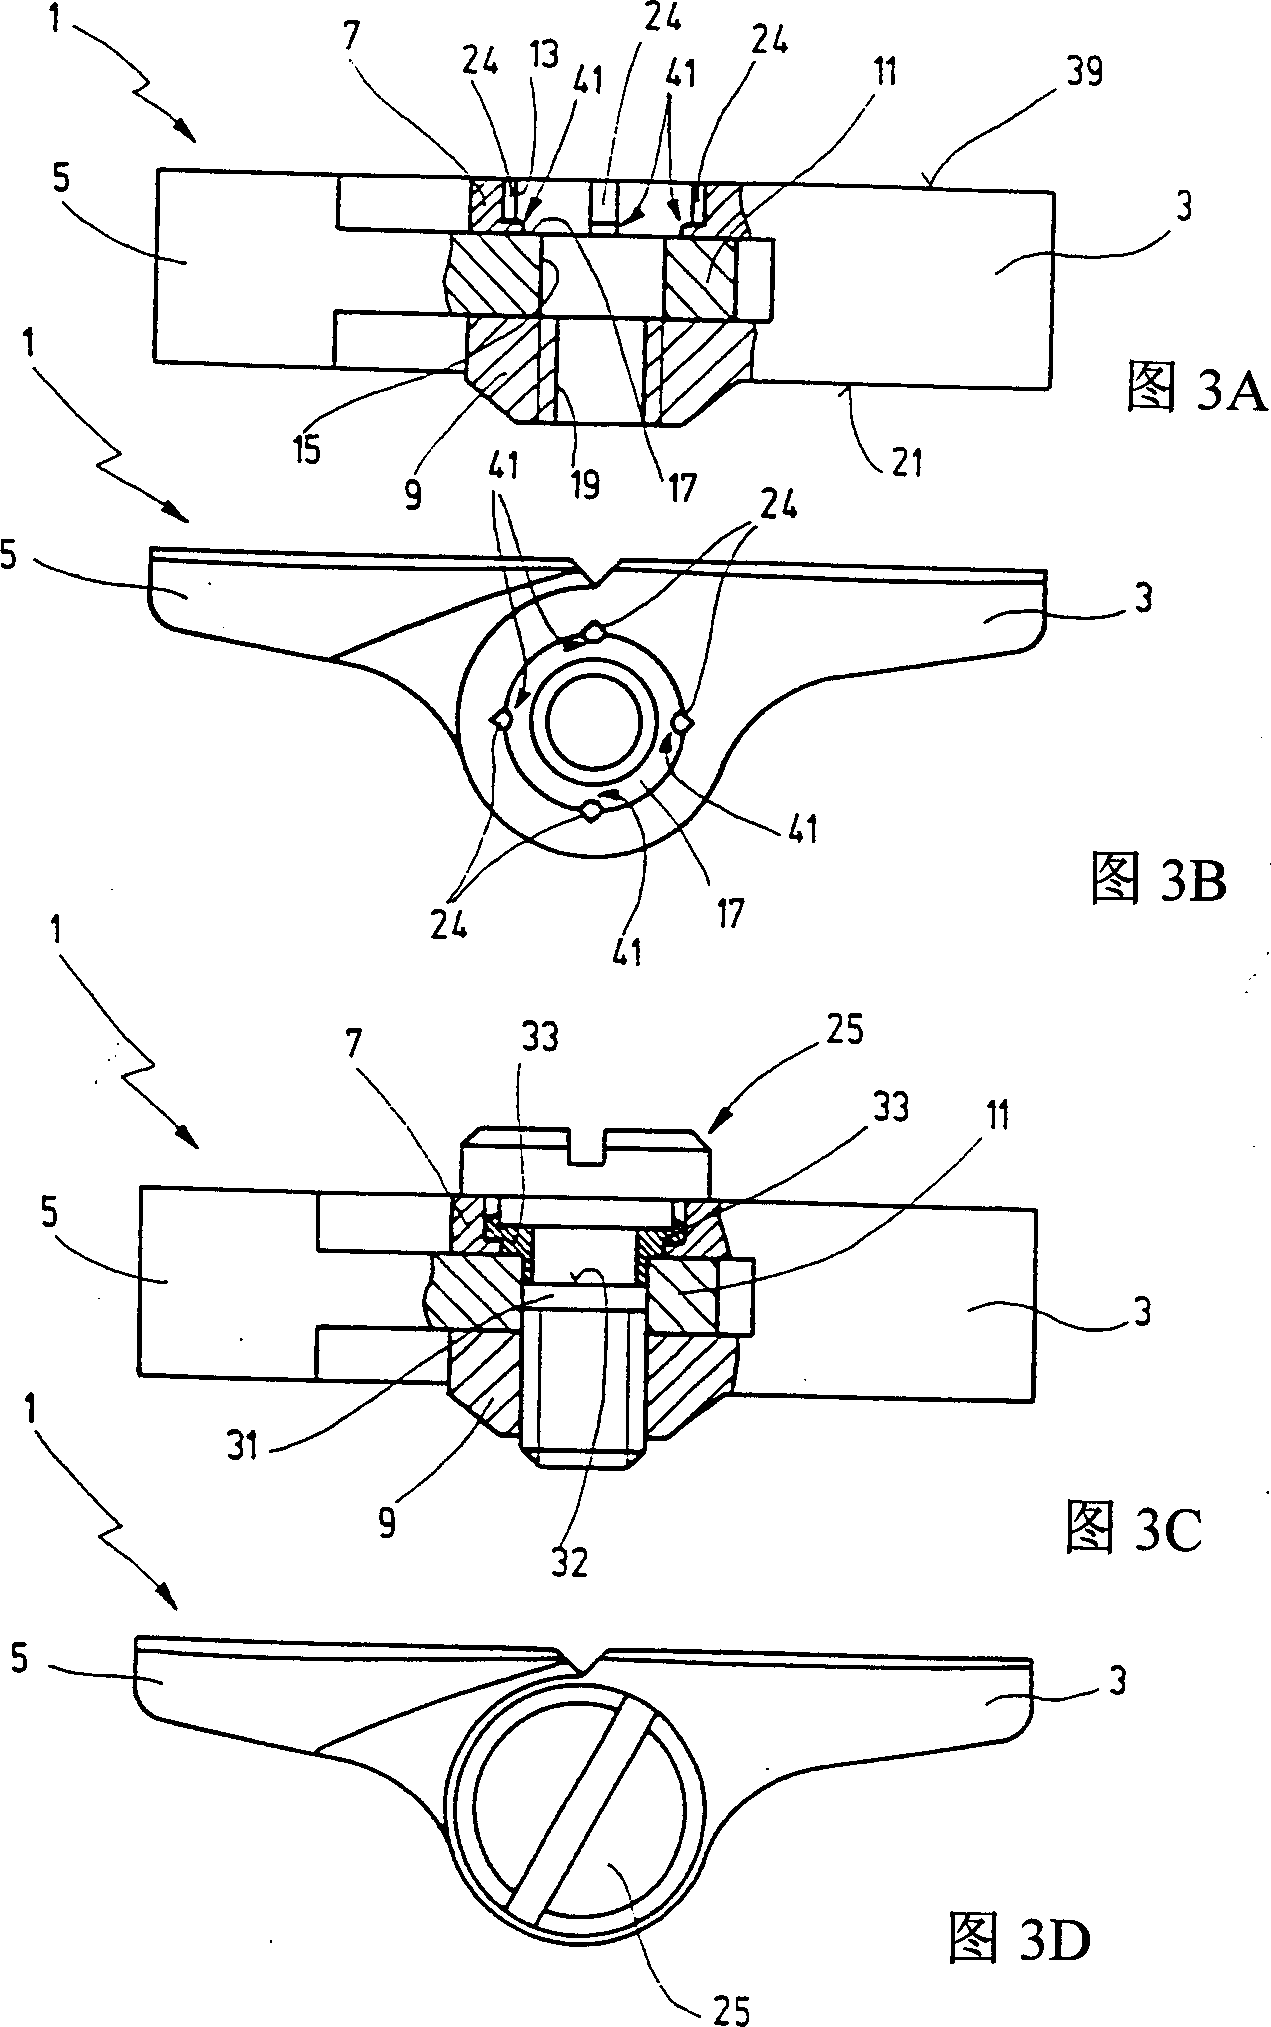 Screw connection of hinge parts